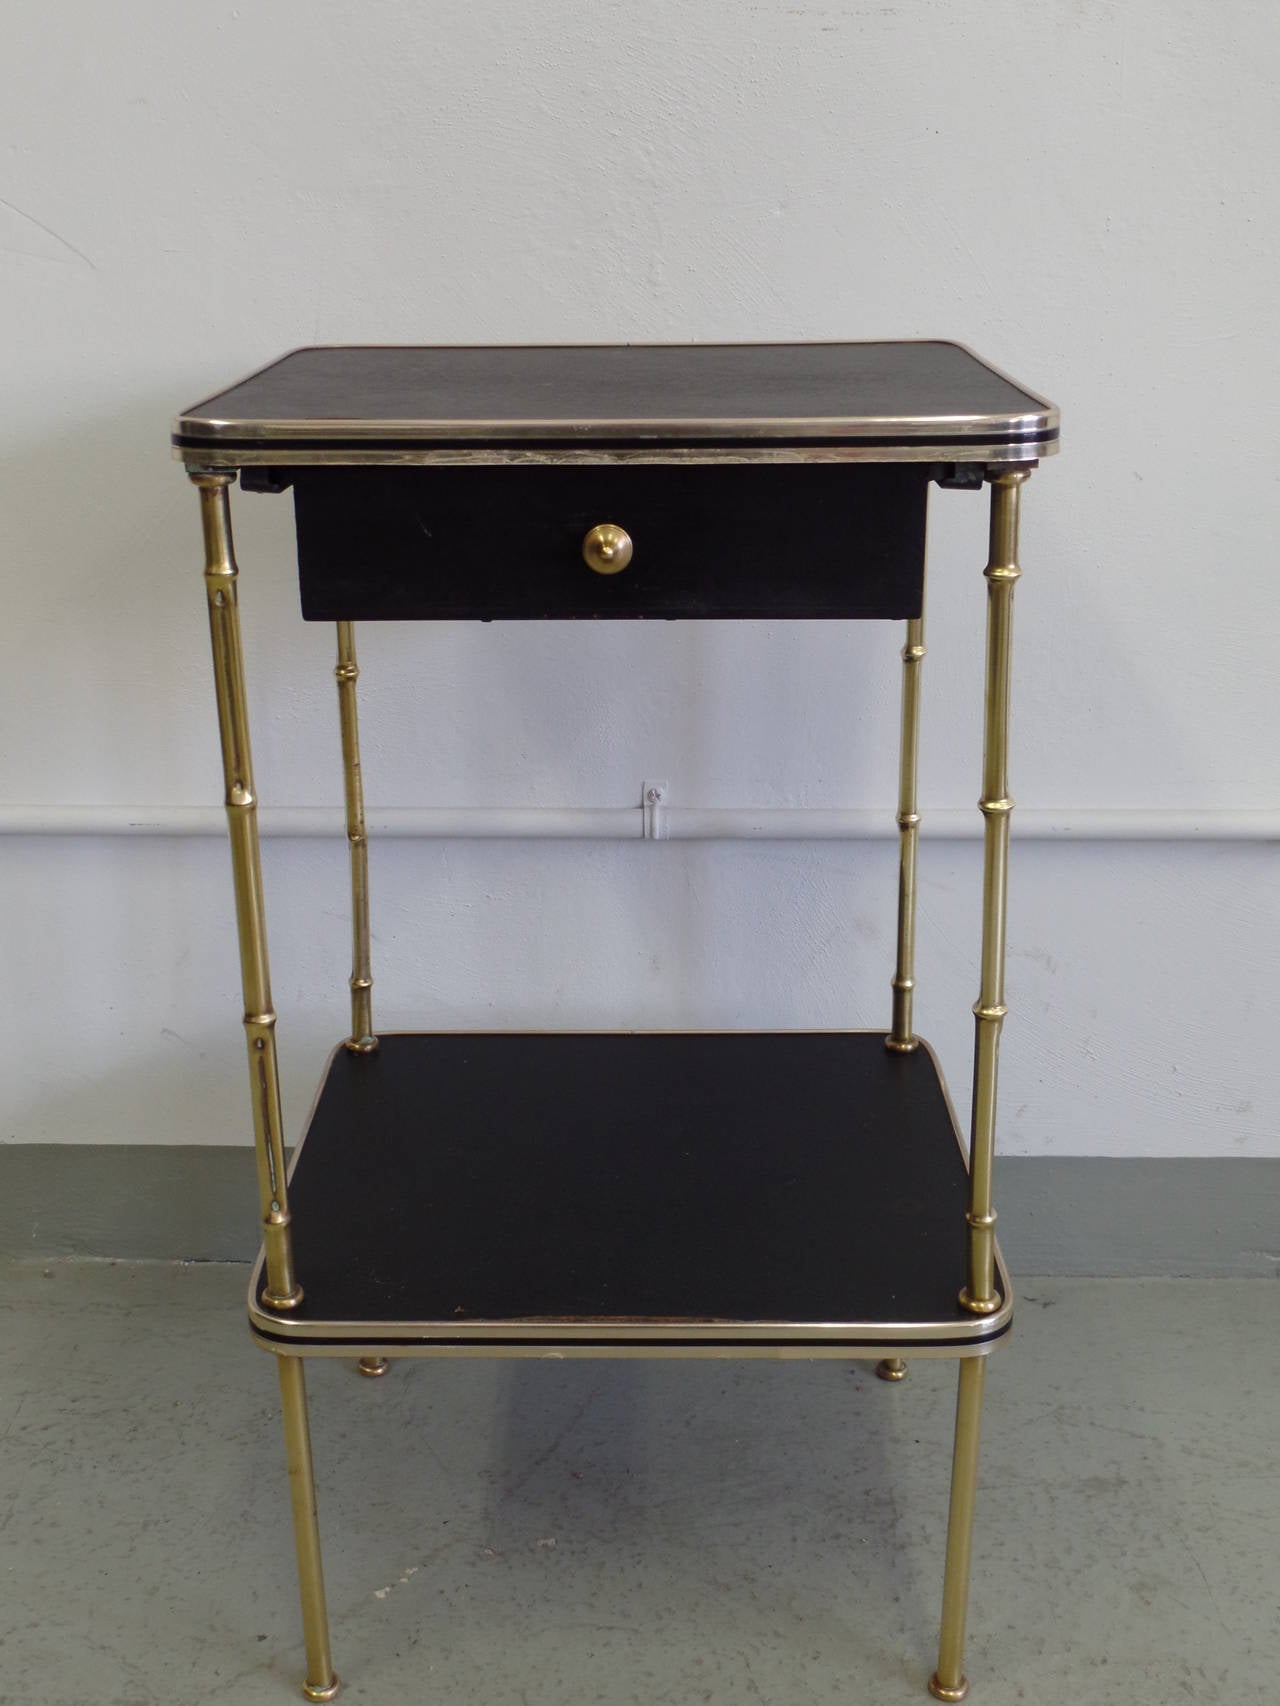 Rare and important pair of French, Mid-Century end tables or nightstands in the Modern Neoclassical spirit with solid brass faux bamboo legs and details and faux leather tops by Jacques Adnet. Each table is double level and has one drawer with brass